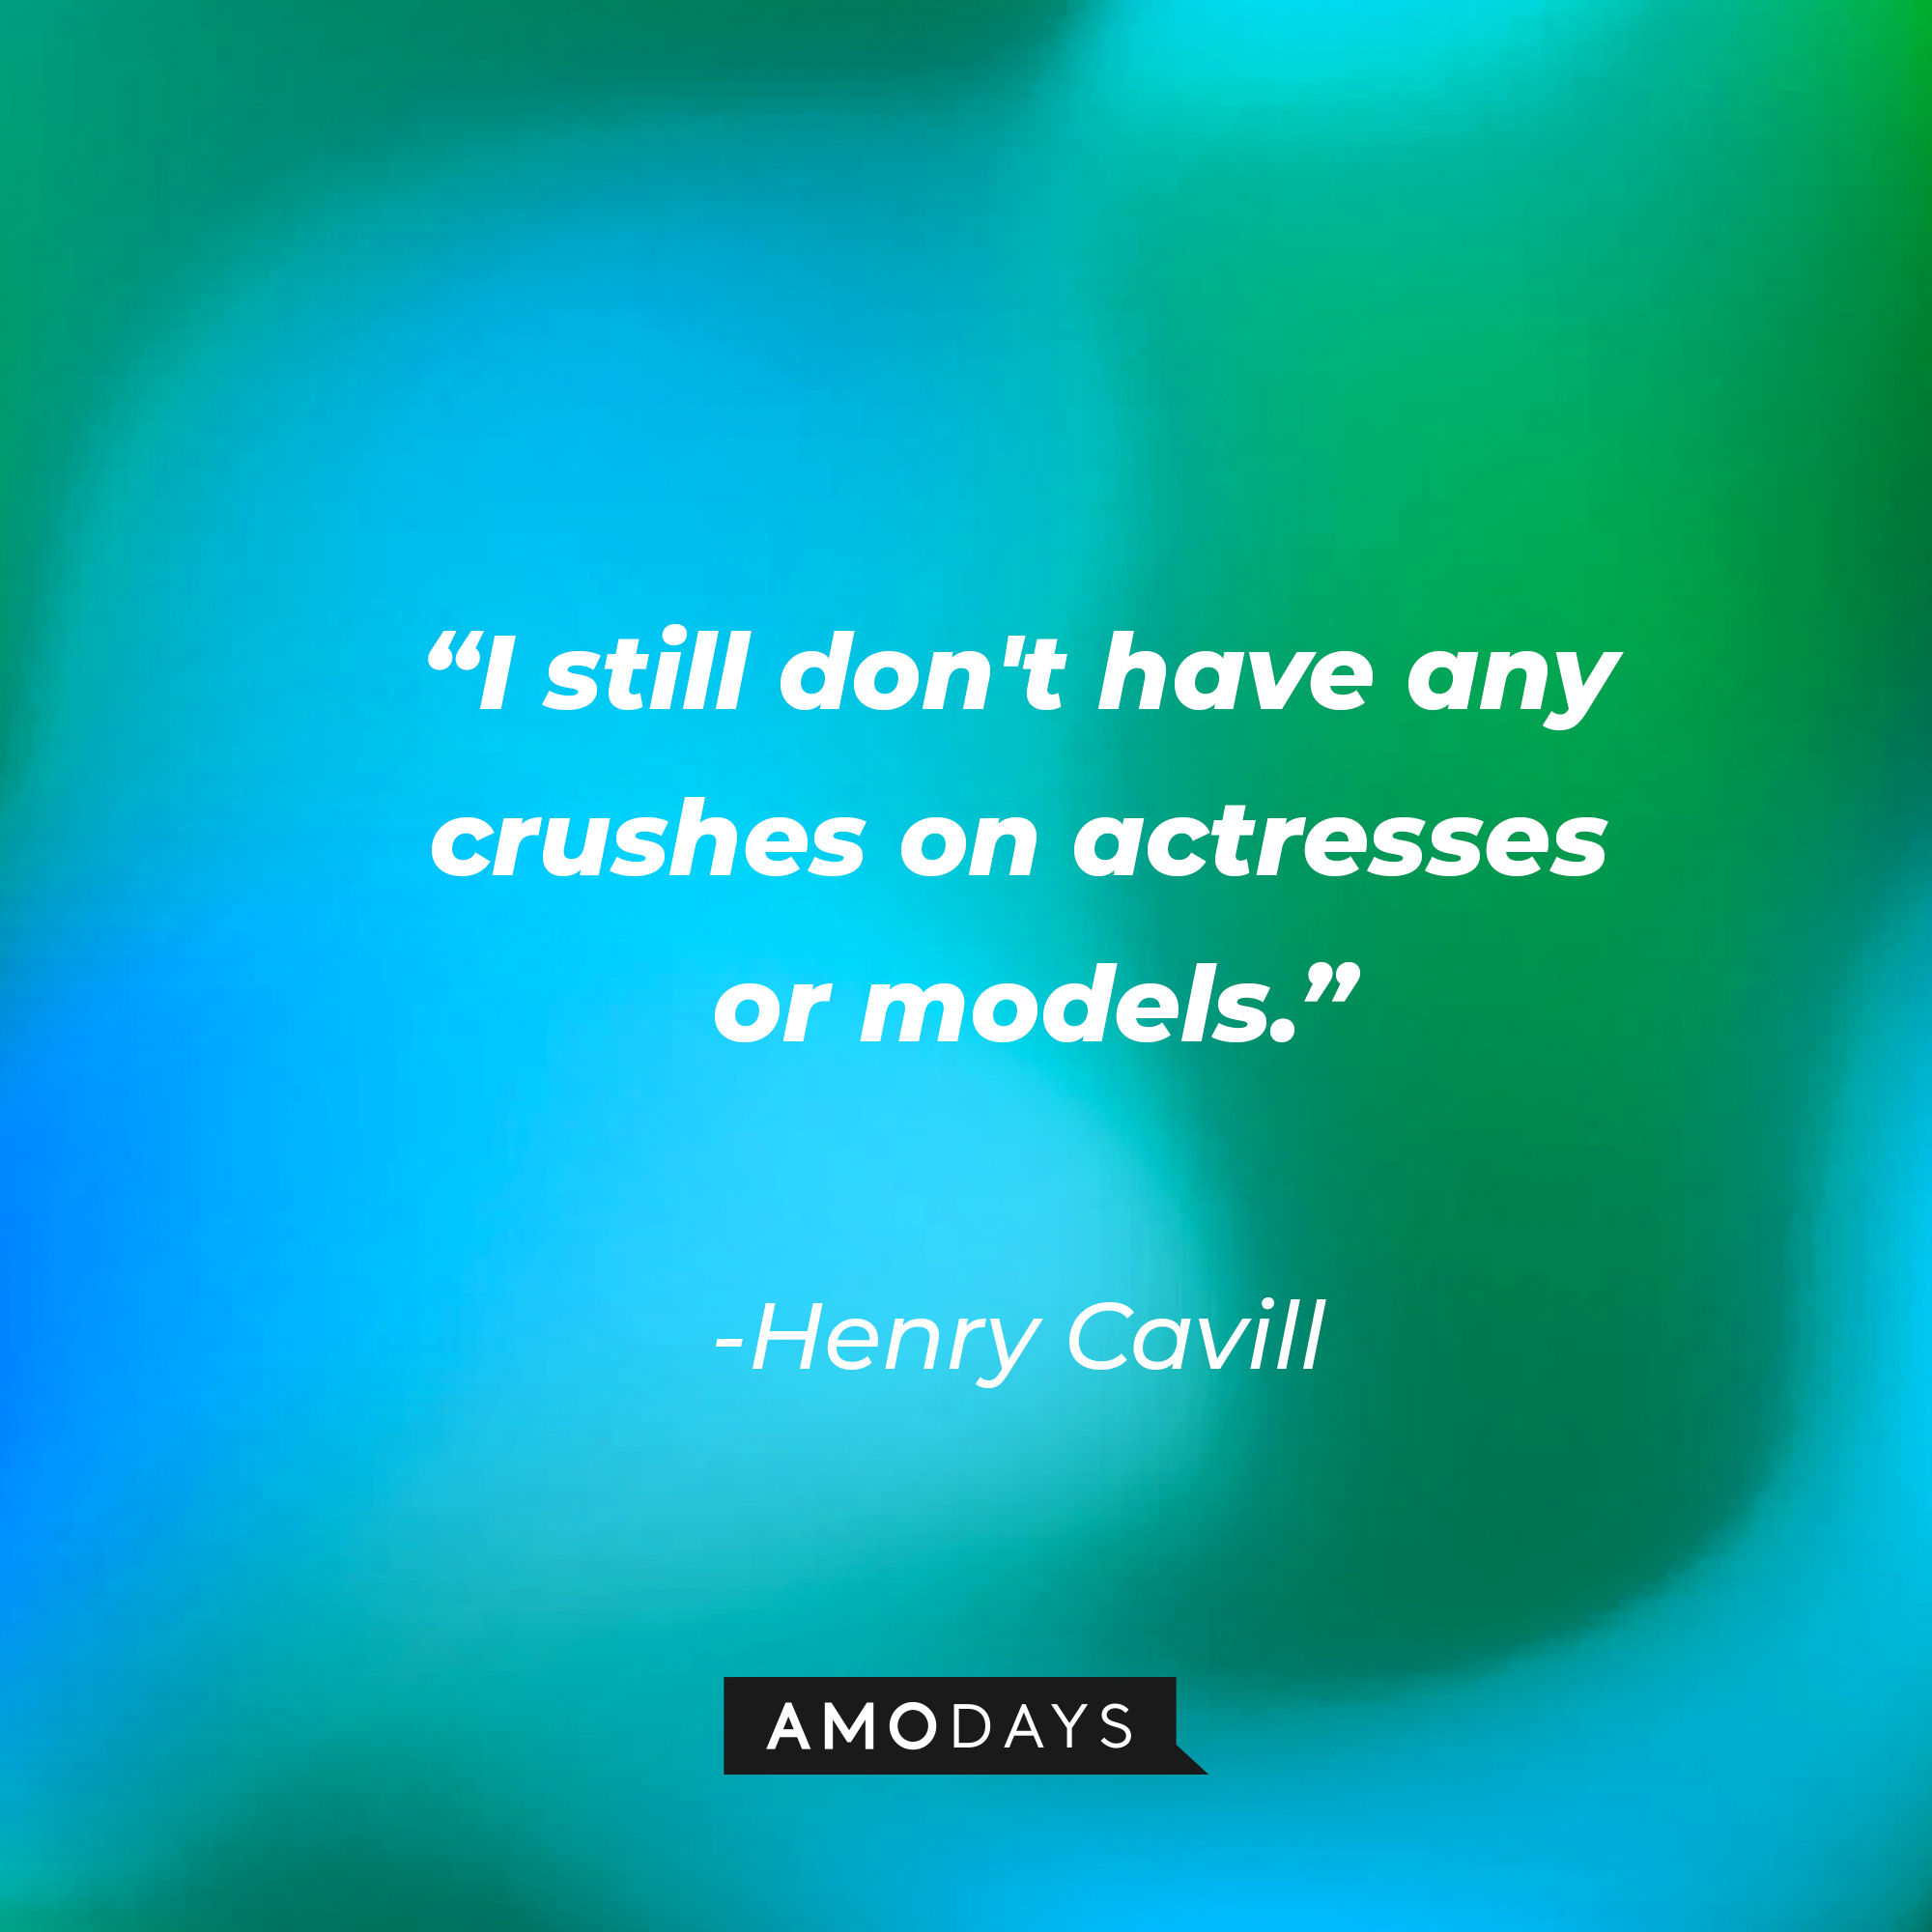 Henry Cavill’s quote: “I still don't have any crushes on actresses or models.” | Source: AmoDays